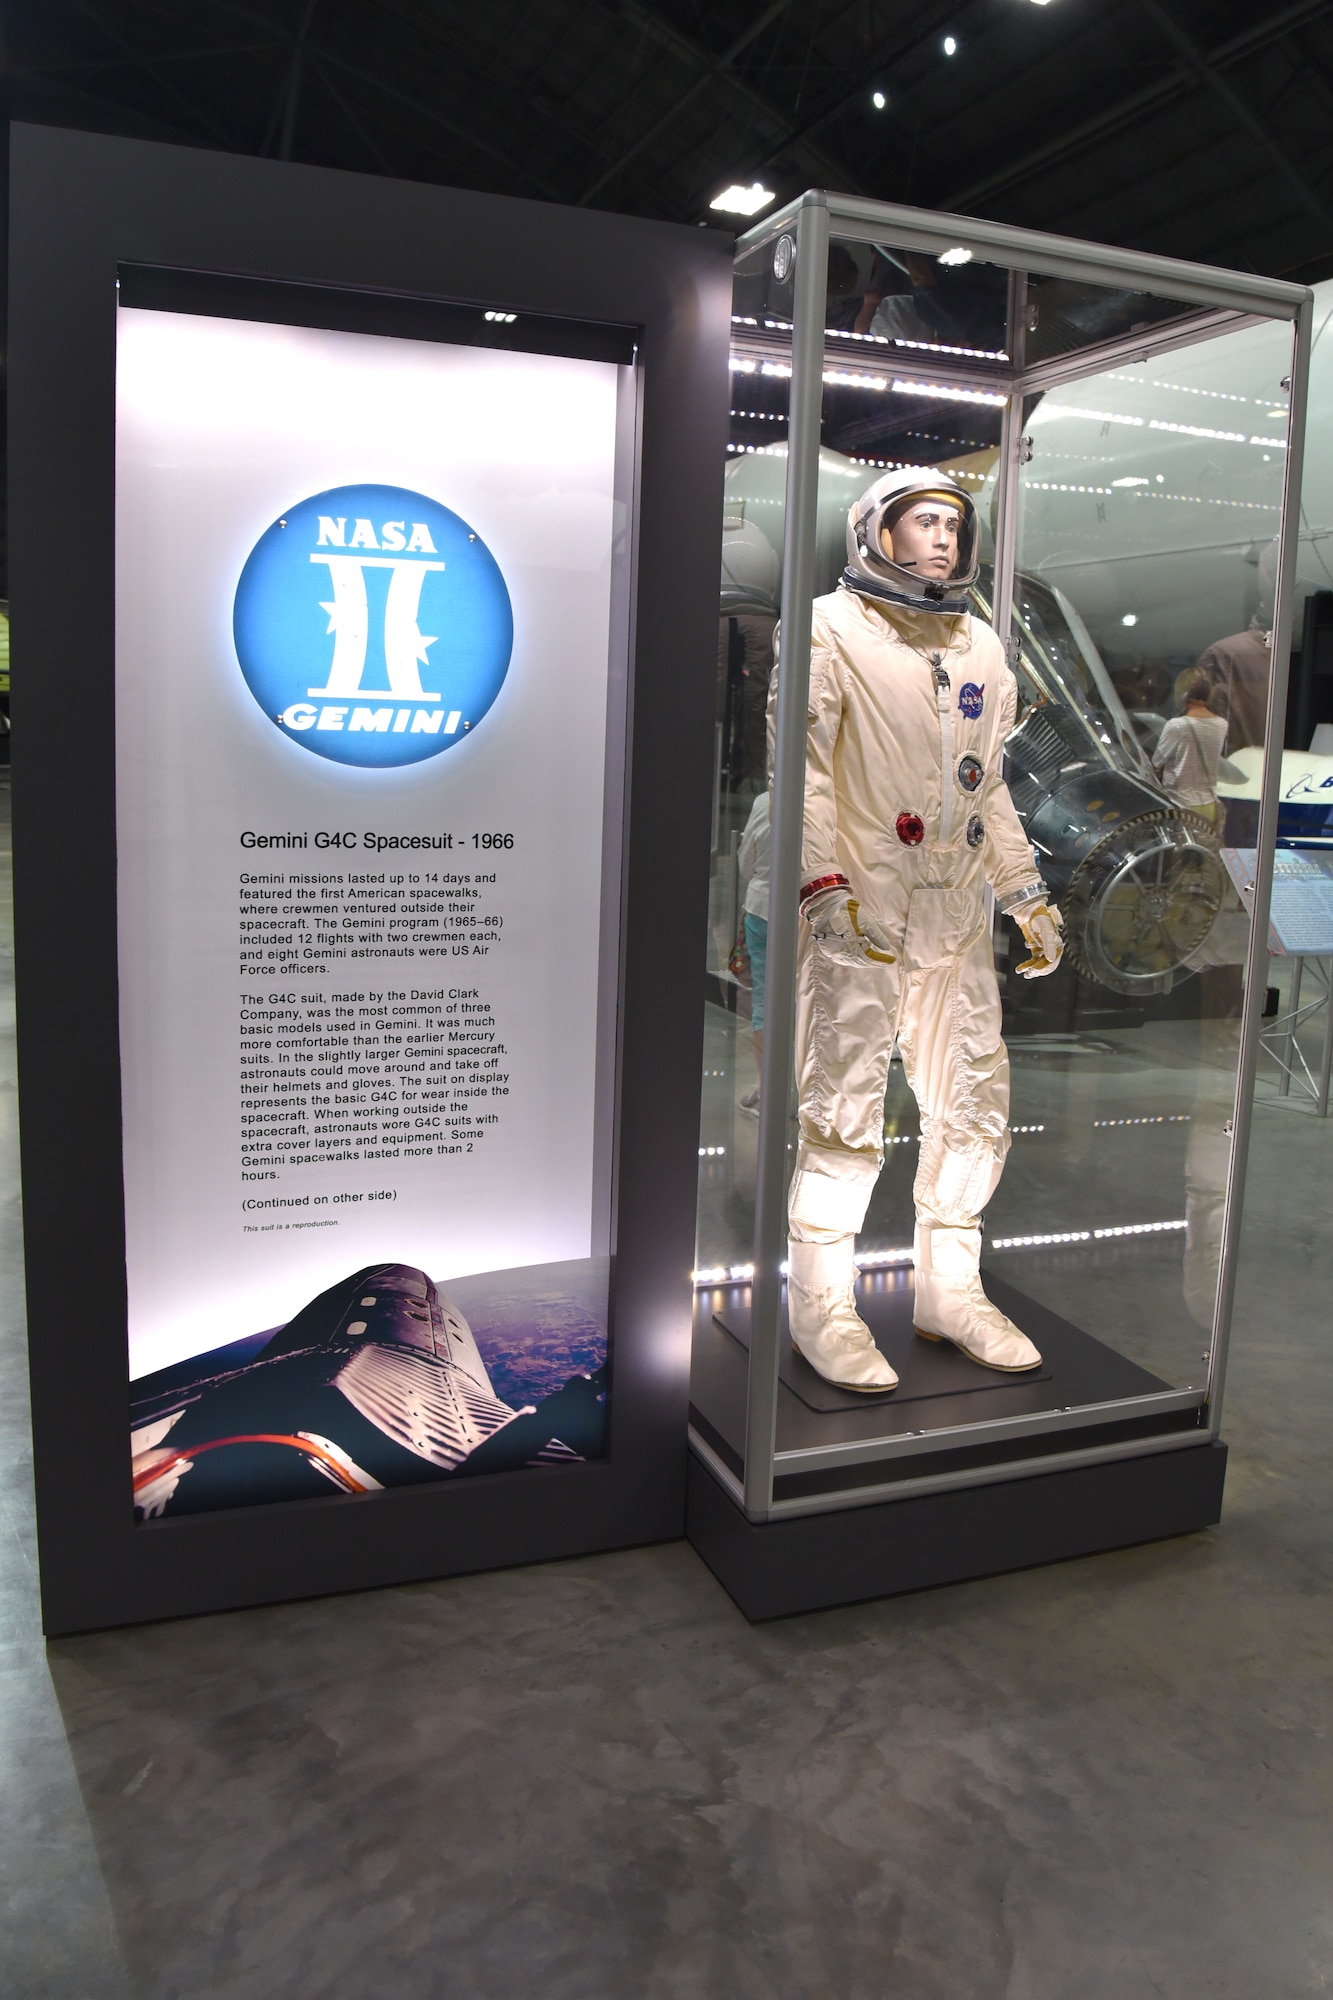 The suit on display represents the basic G4C for wear inside the Gemini spacecraft. This suit is a reproduction and is on display in the museum's fourth building. (U.S. Air Force photo by Ken LaRock)